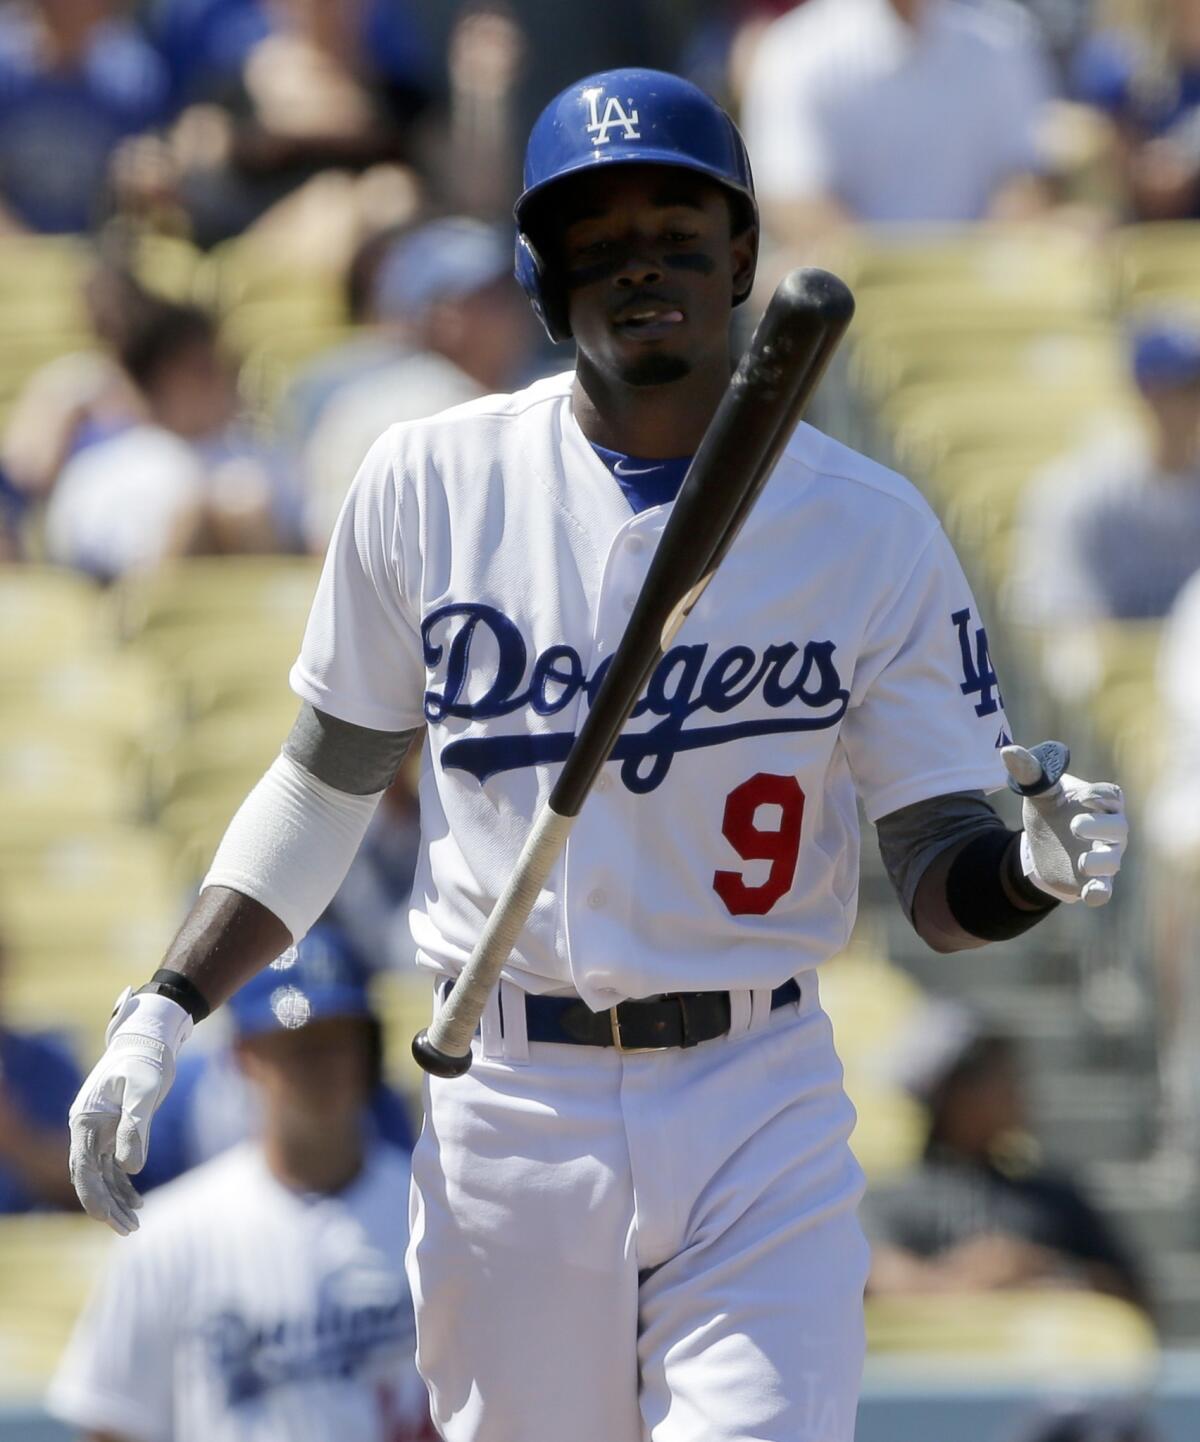 Dodgers shortstop Dee Gordon reacts after striking out during the team's 4-3 loss to the San Francisco Giants on Sunday afternoon.